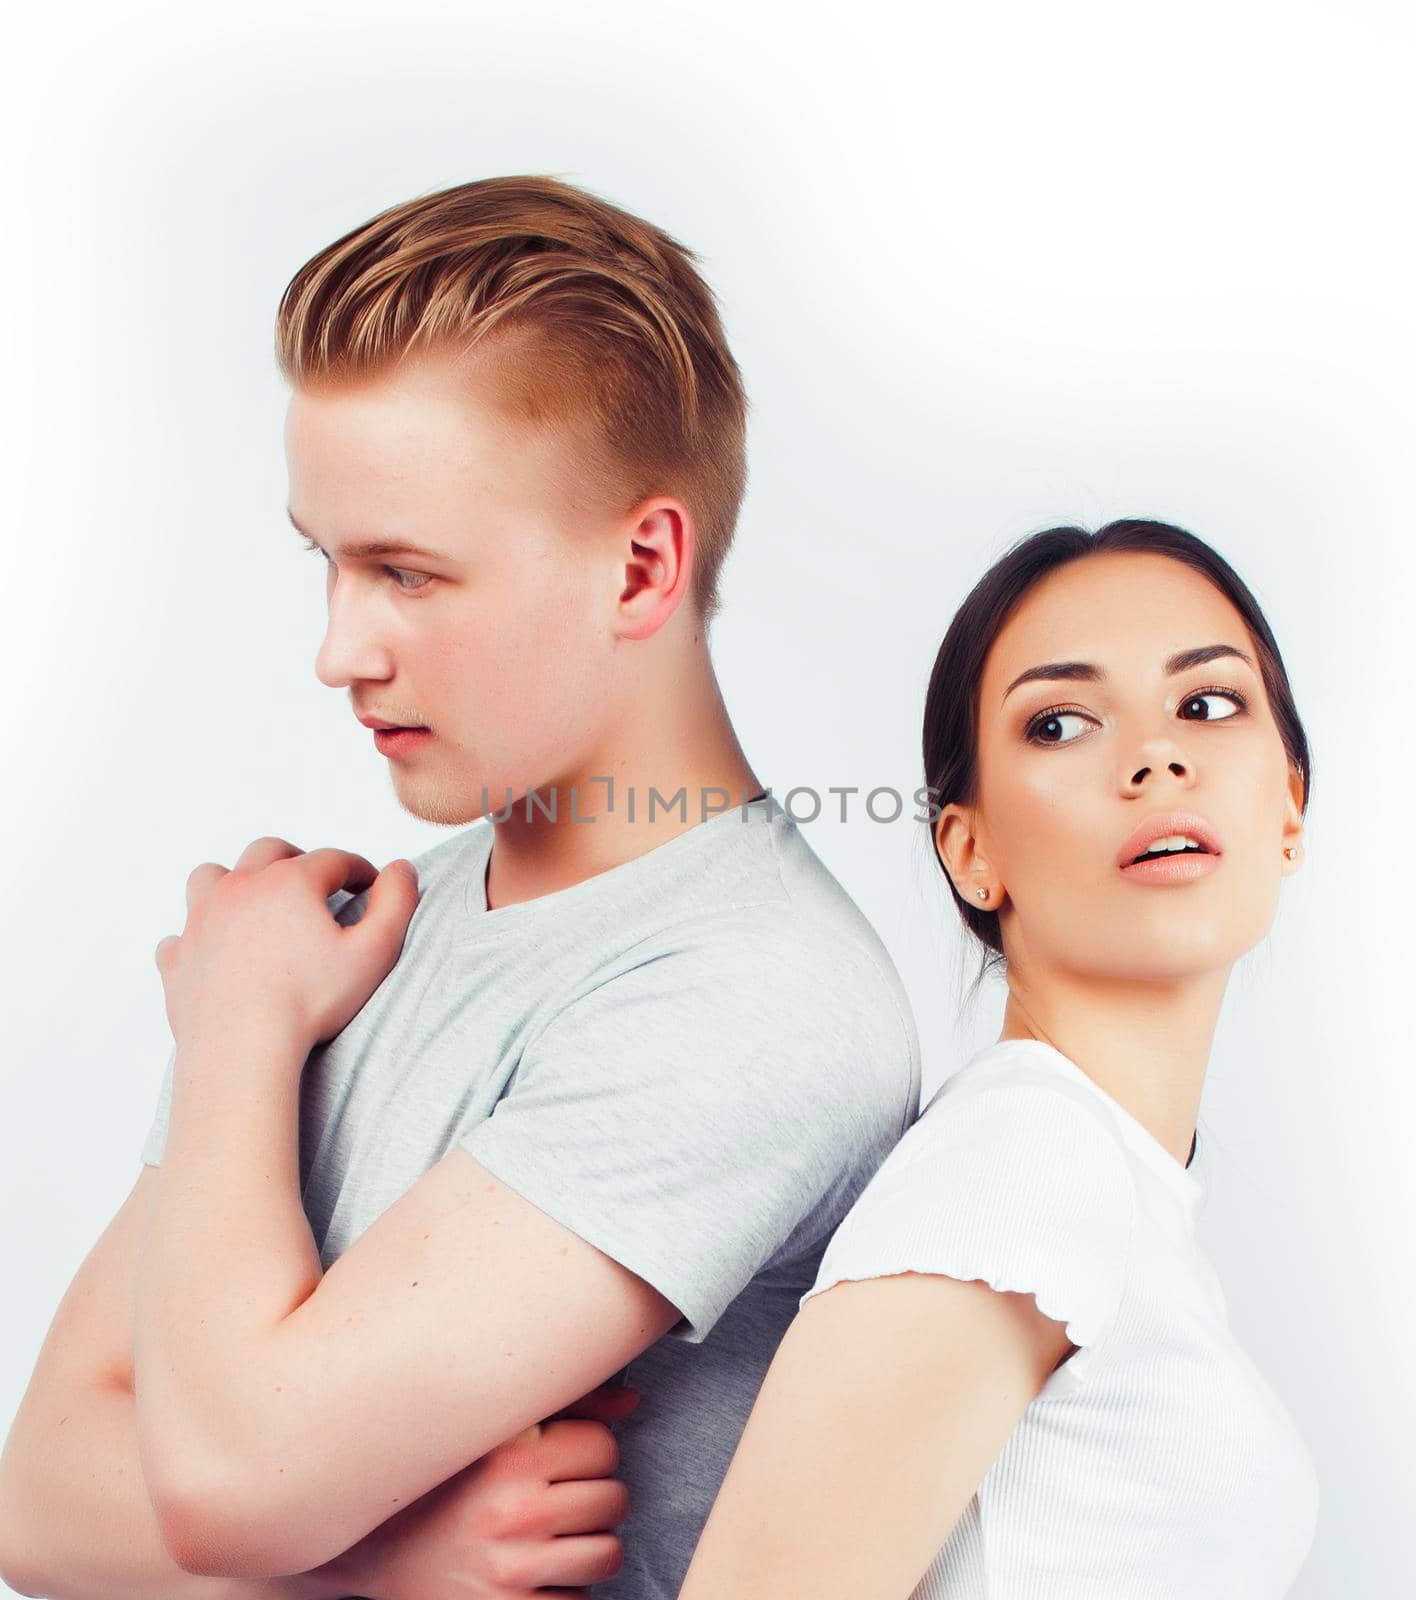 modern hipster guys together couple diverse nations, asian girl and caucasian blond boy isolated on white background, lifestyle people concept close up